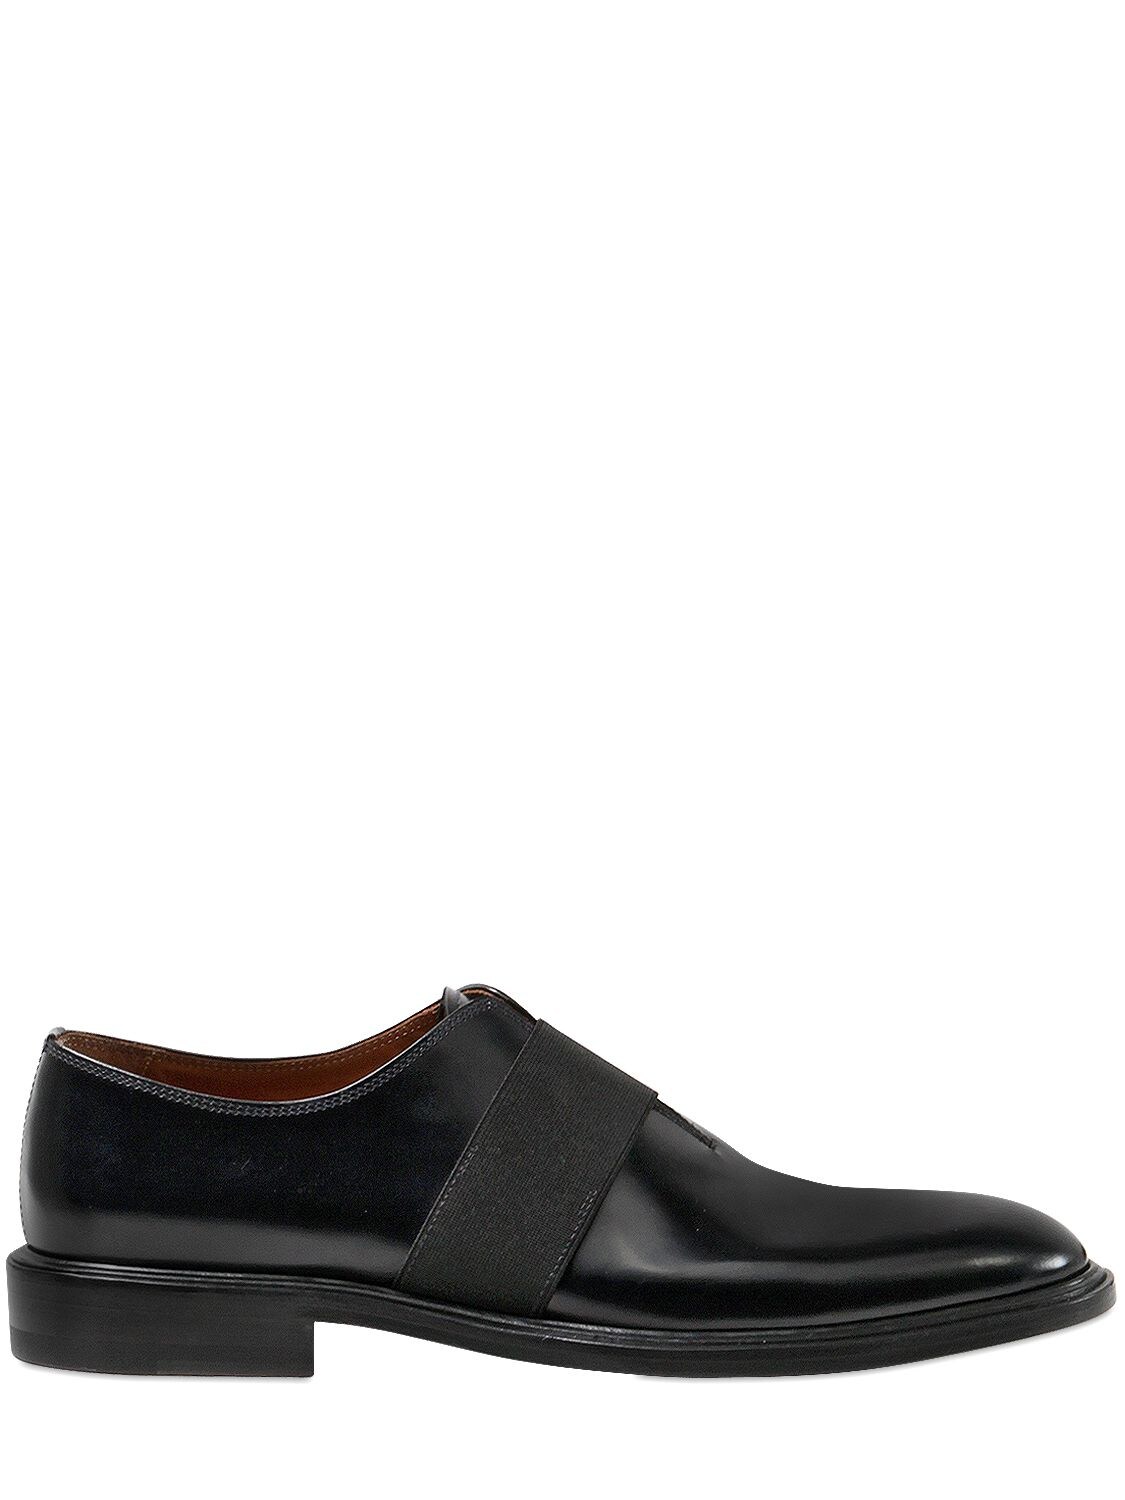 Givenchy Brushed Leather Oxford Shoes In Black